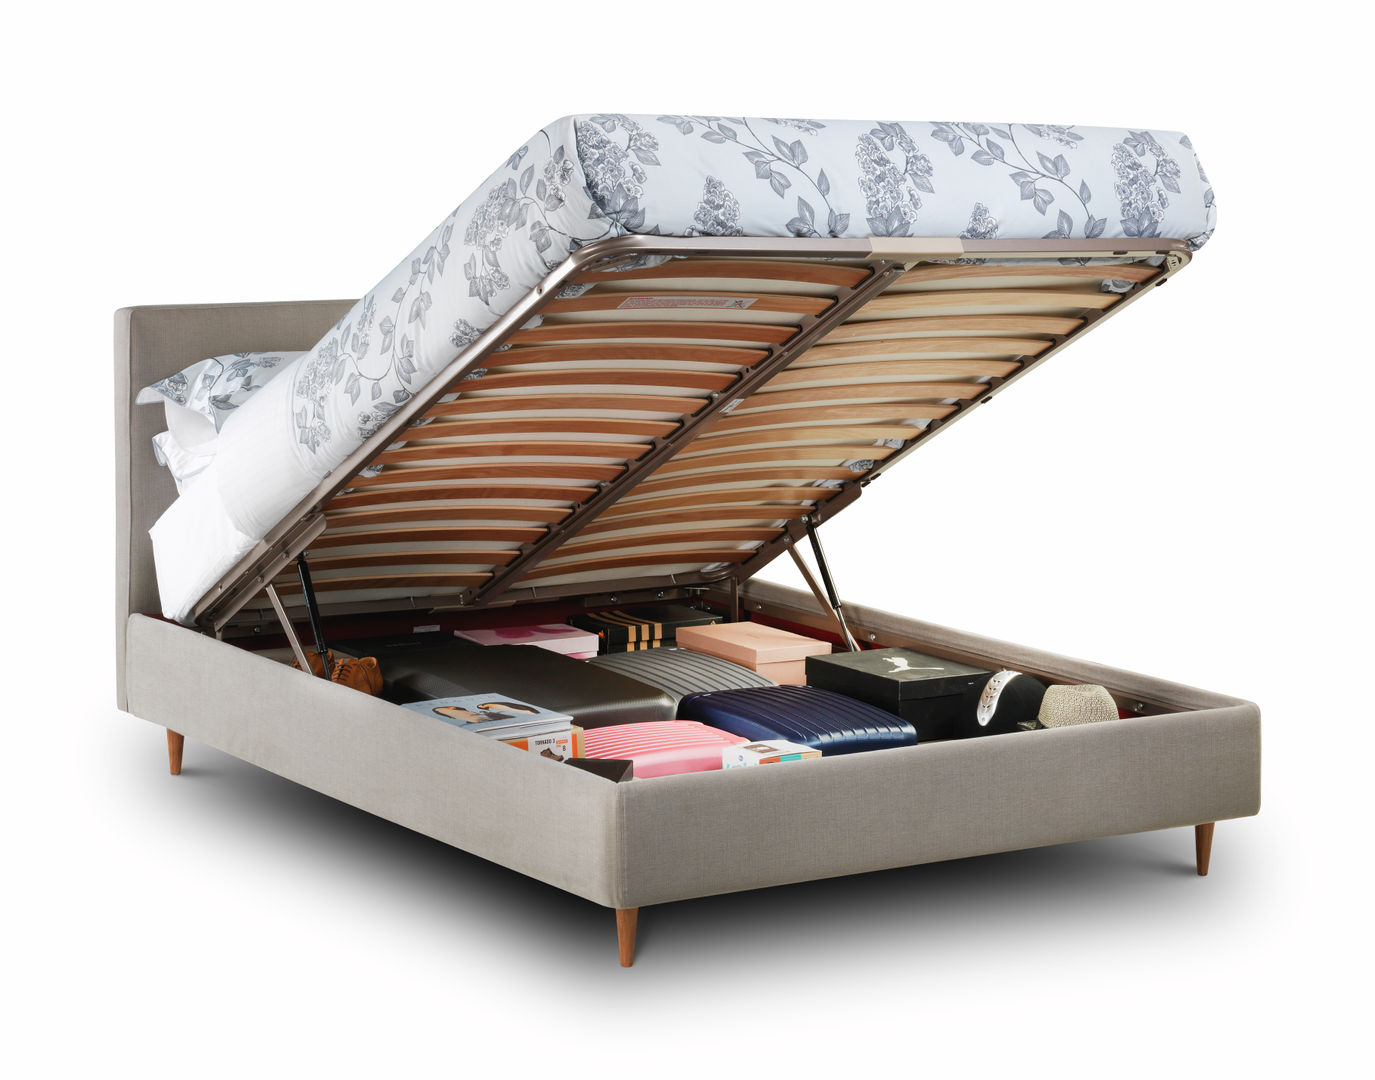 Sofa Beds, THE STORAGE BED THE STORAGE BED Classic style bedroom Beds & headboards